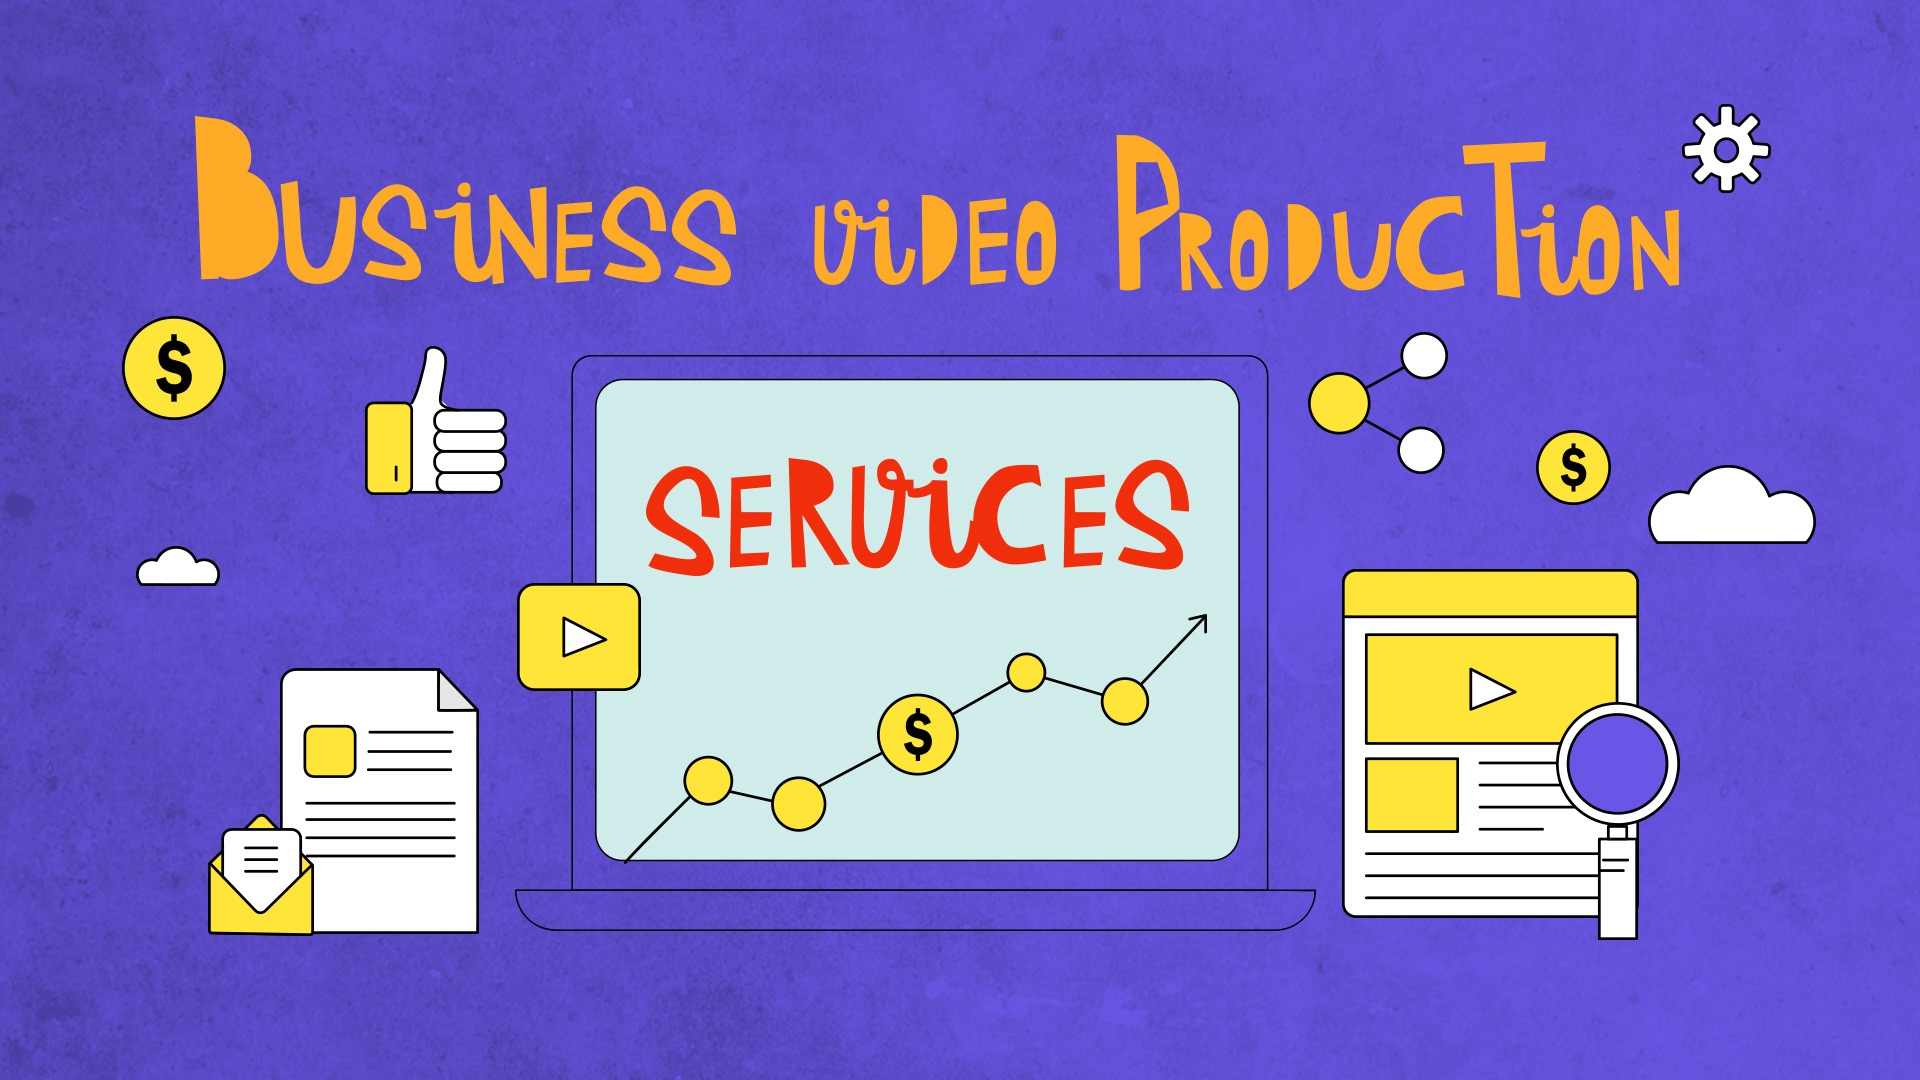 Business video production services